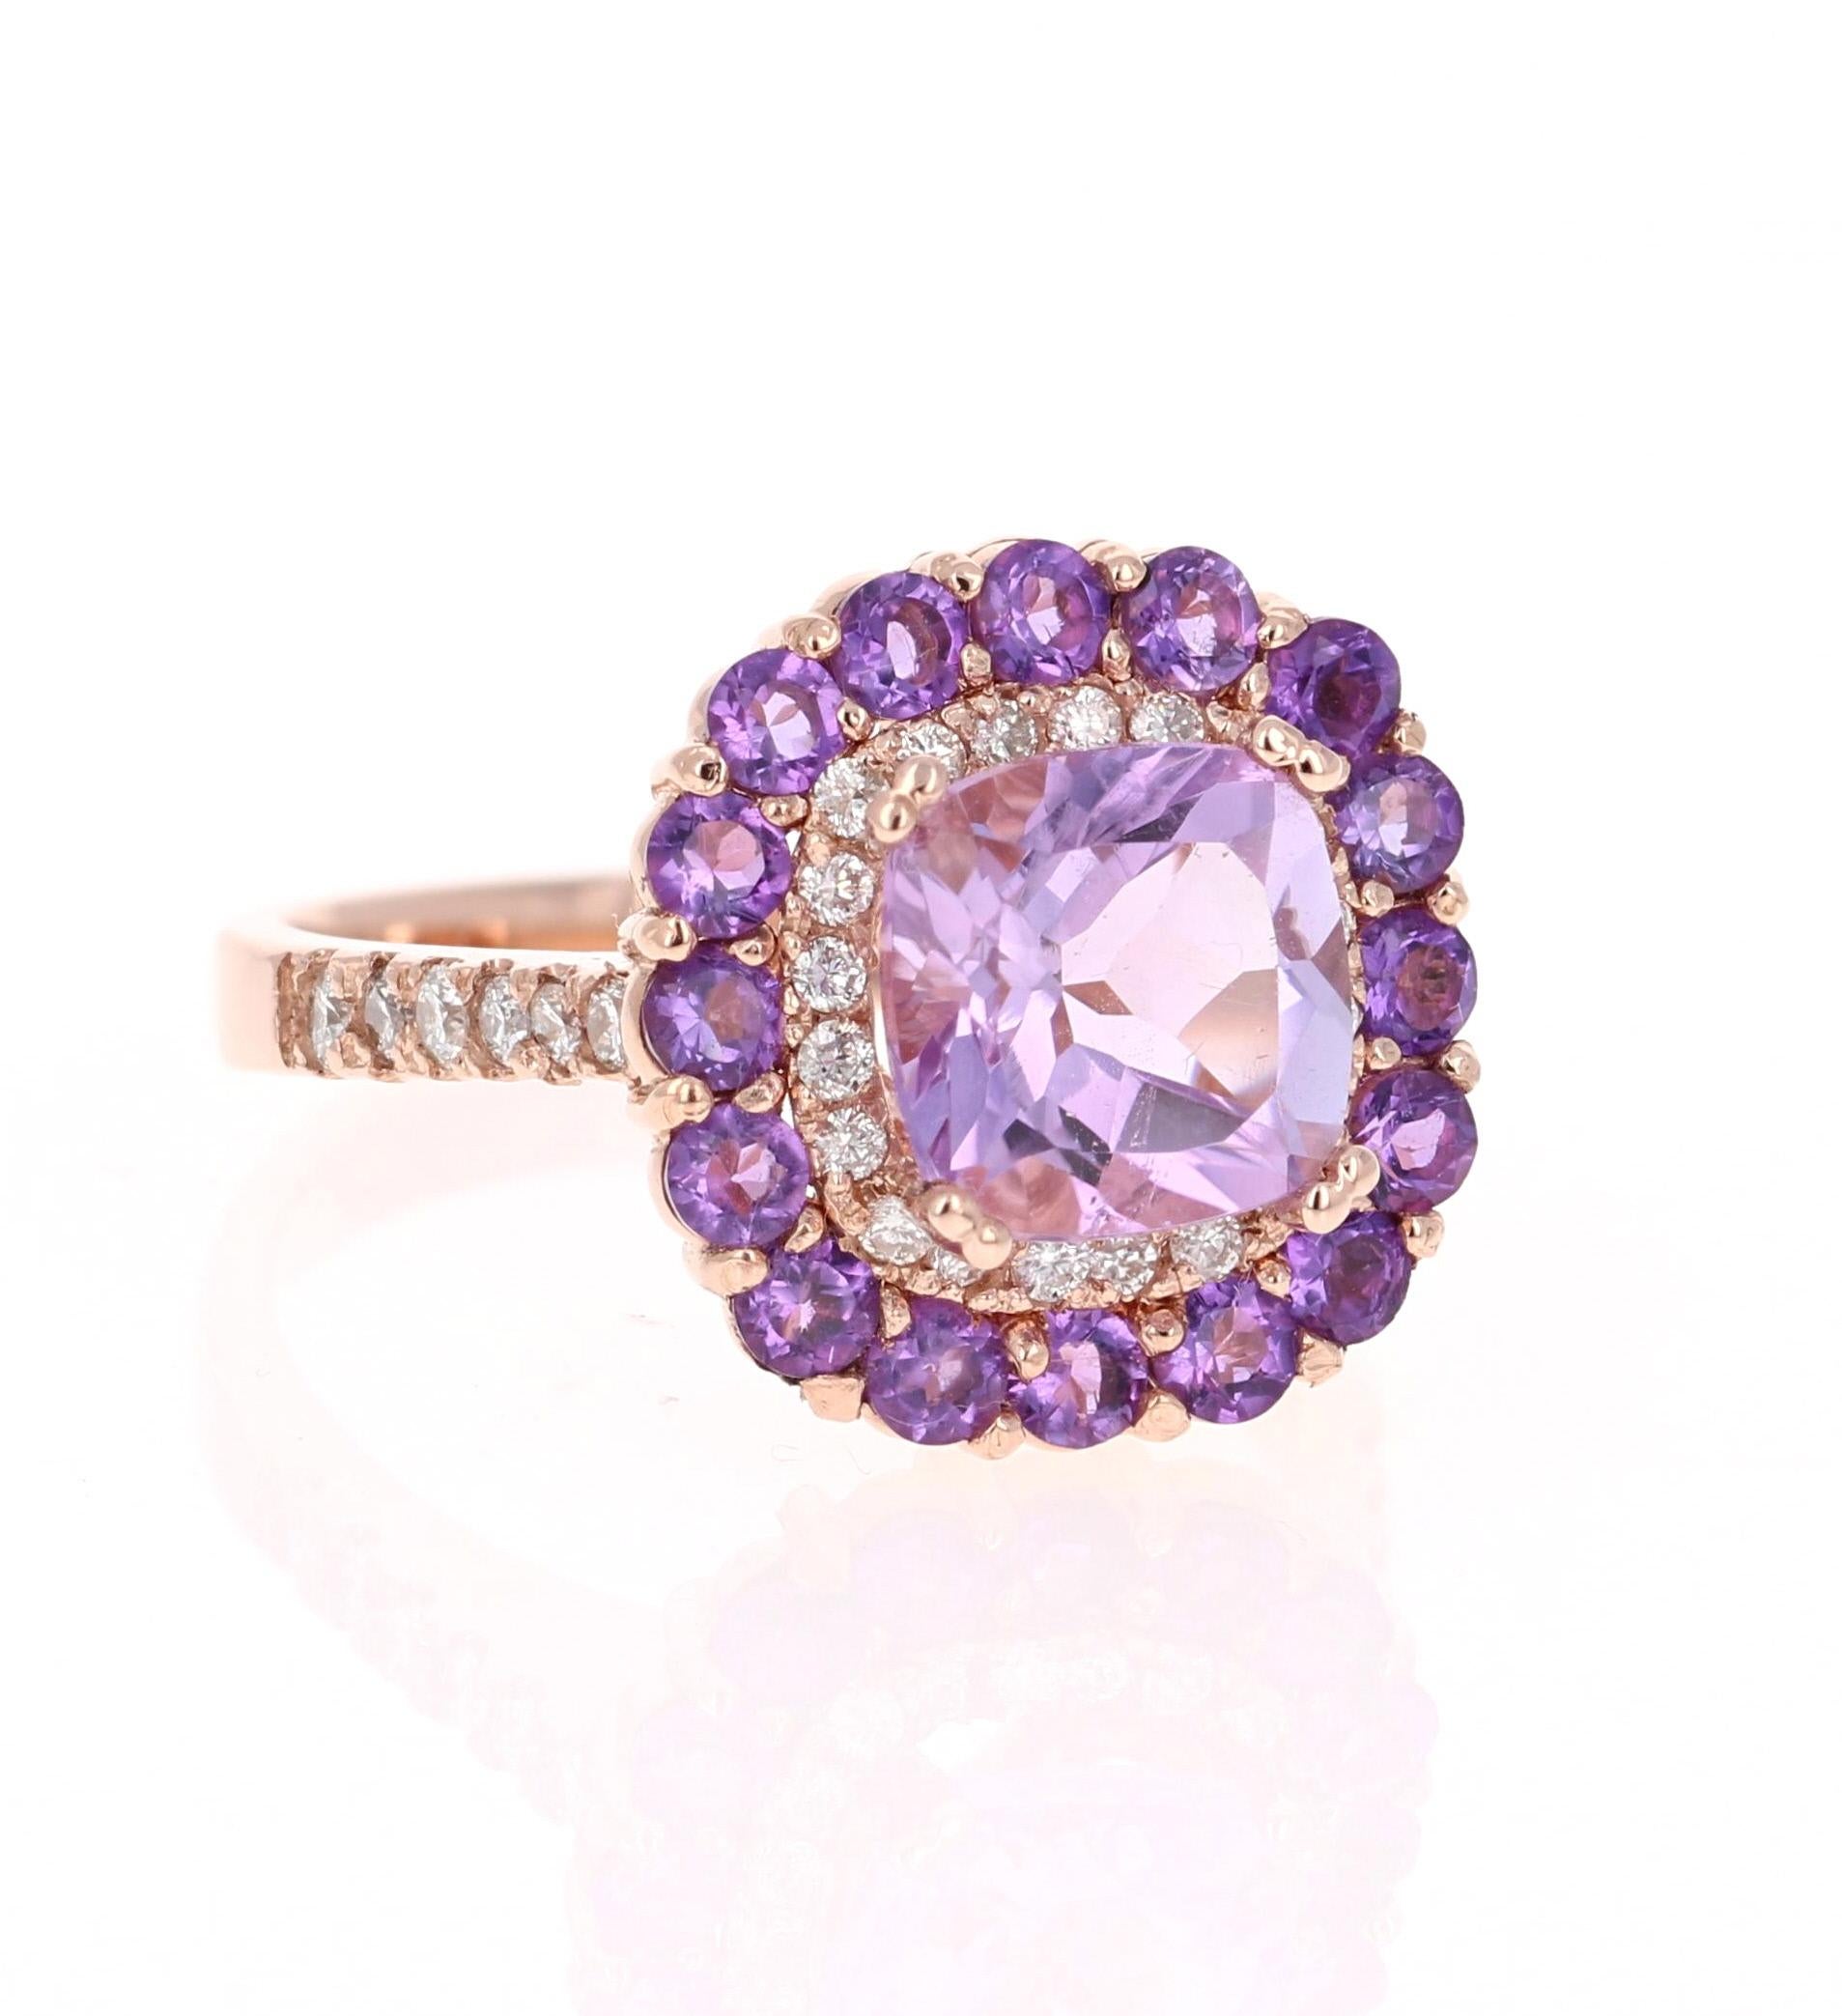 Amethyst and Diamond Cocktail Ring! 

Playful yet Powerful! Its like having a piece of glittery candy on your finger! This ring has a light purple Cushion Cut Amethyst that weighs 2.29 Carats and is embellished with 16 Amethysts that weigh 0.87